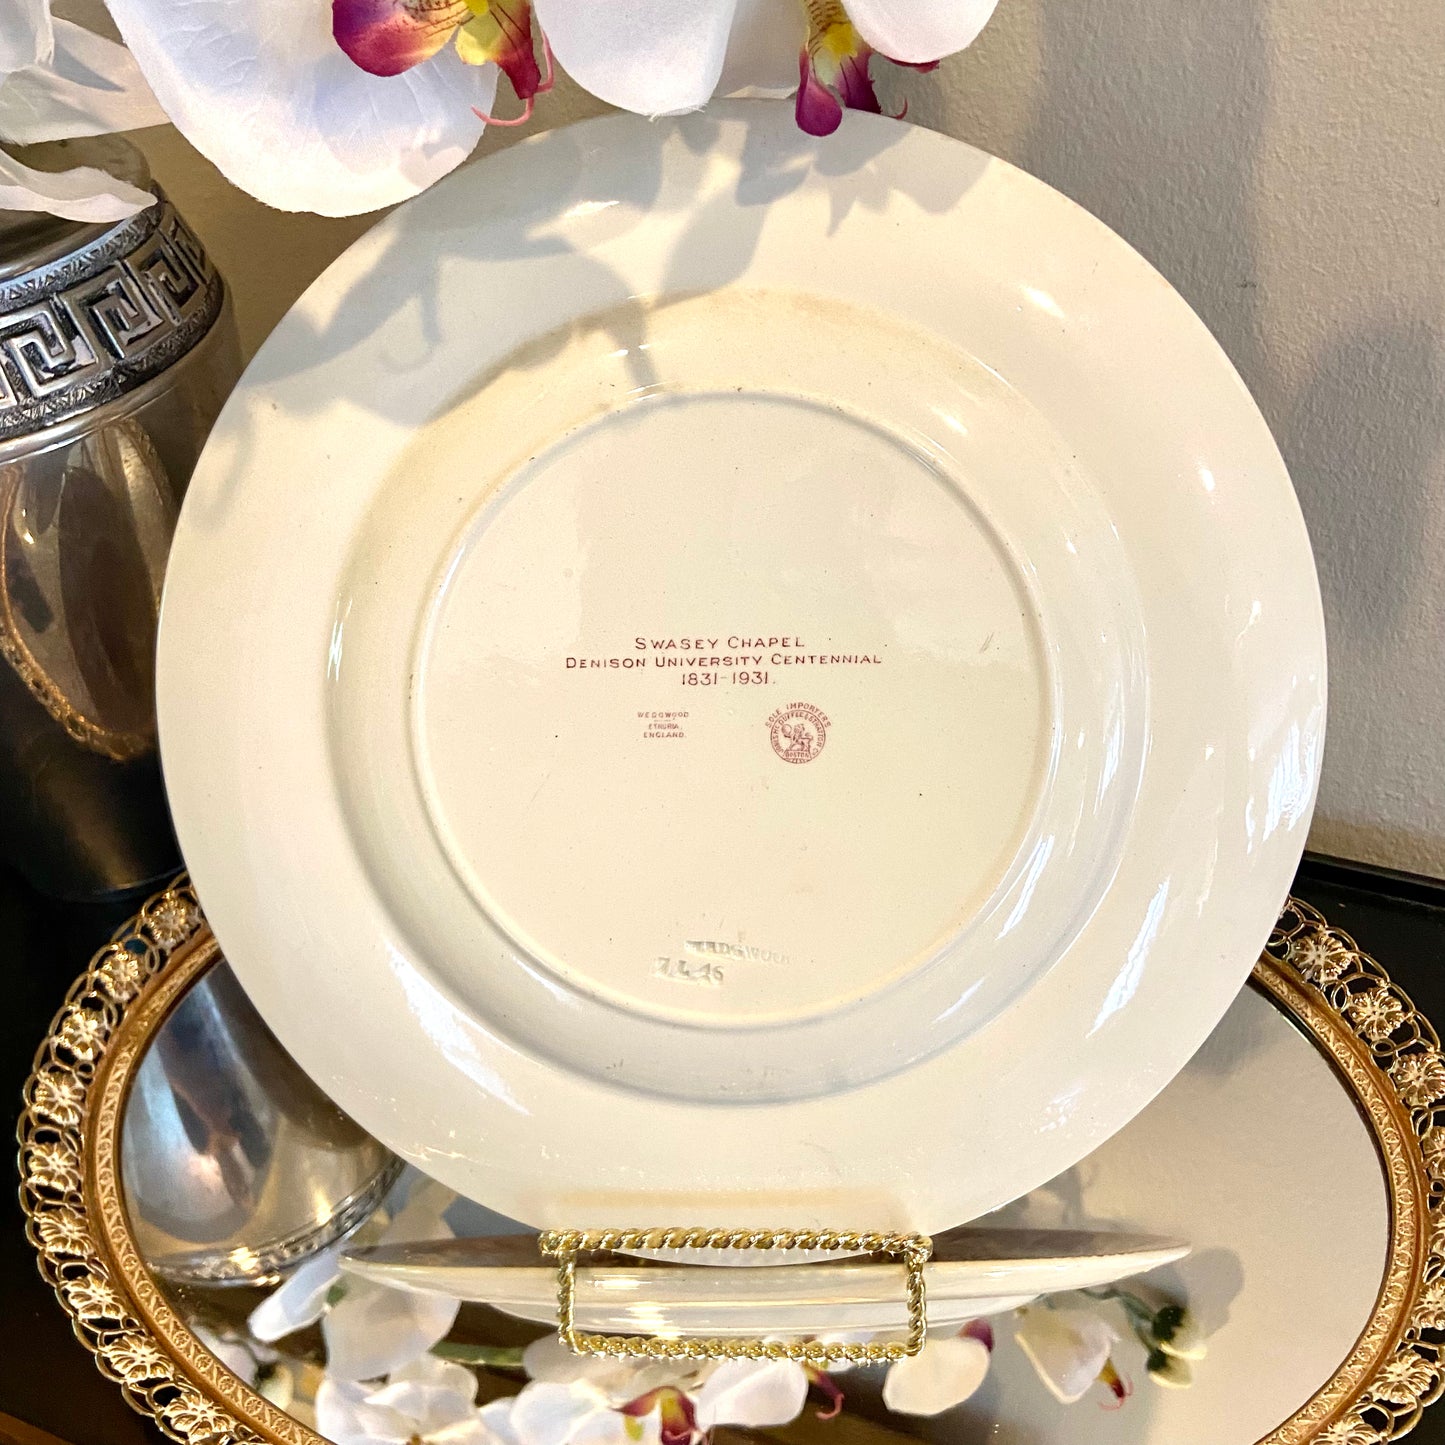 Vintage pink and white Denison University Souvenir Plate by Wedgwood of England